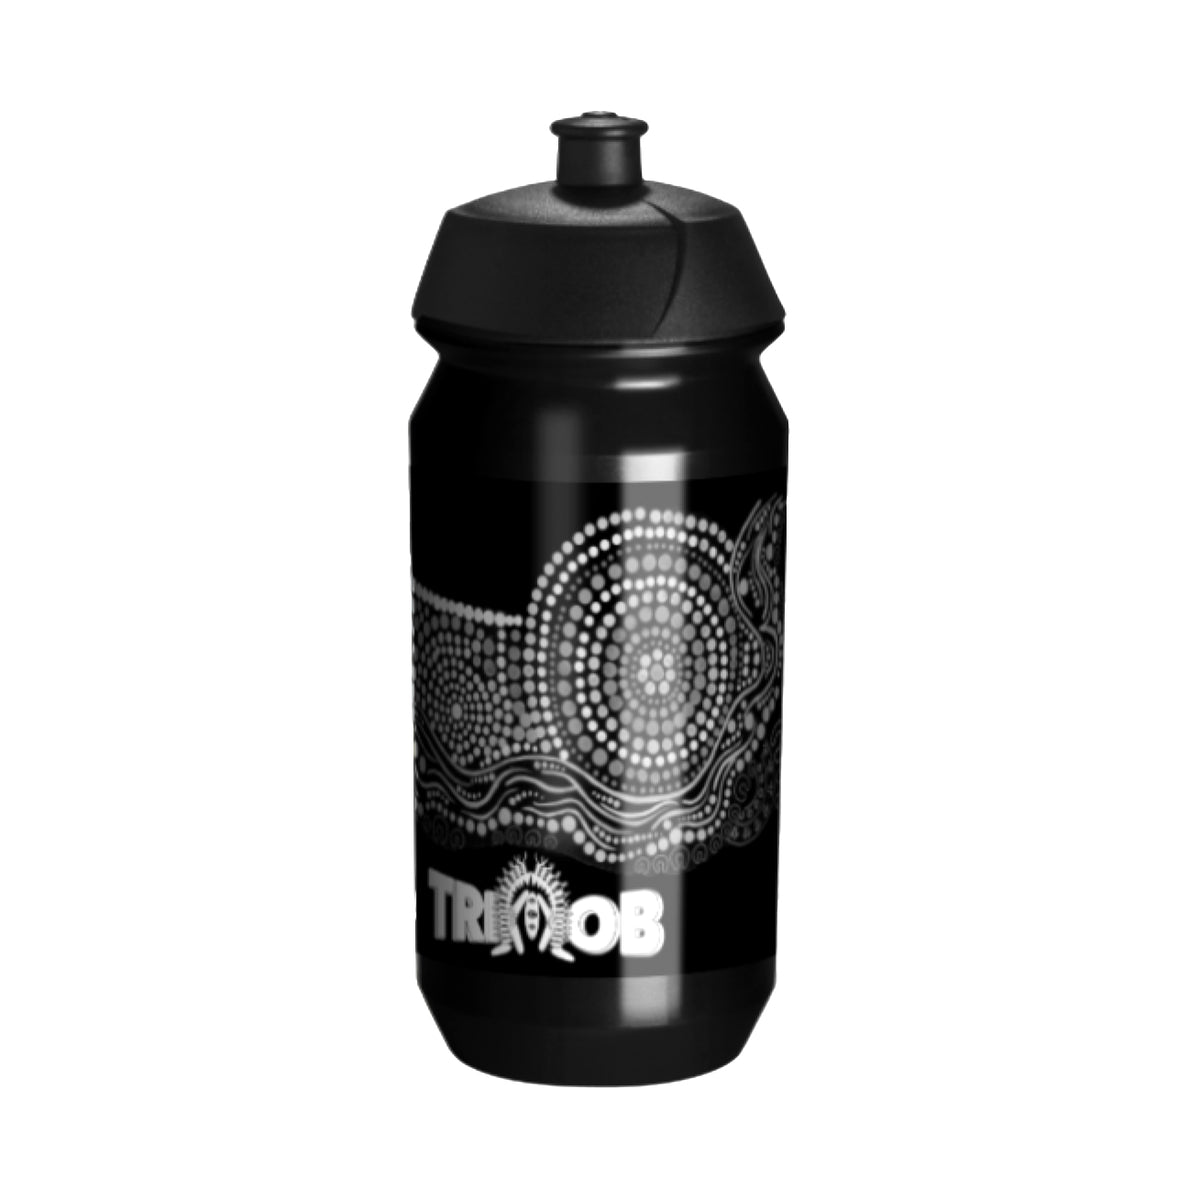 Aid Station - TRIMOB Collab Drink Bottle 500ml [Limited Edition]